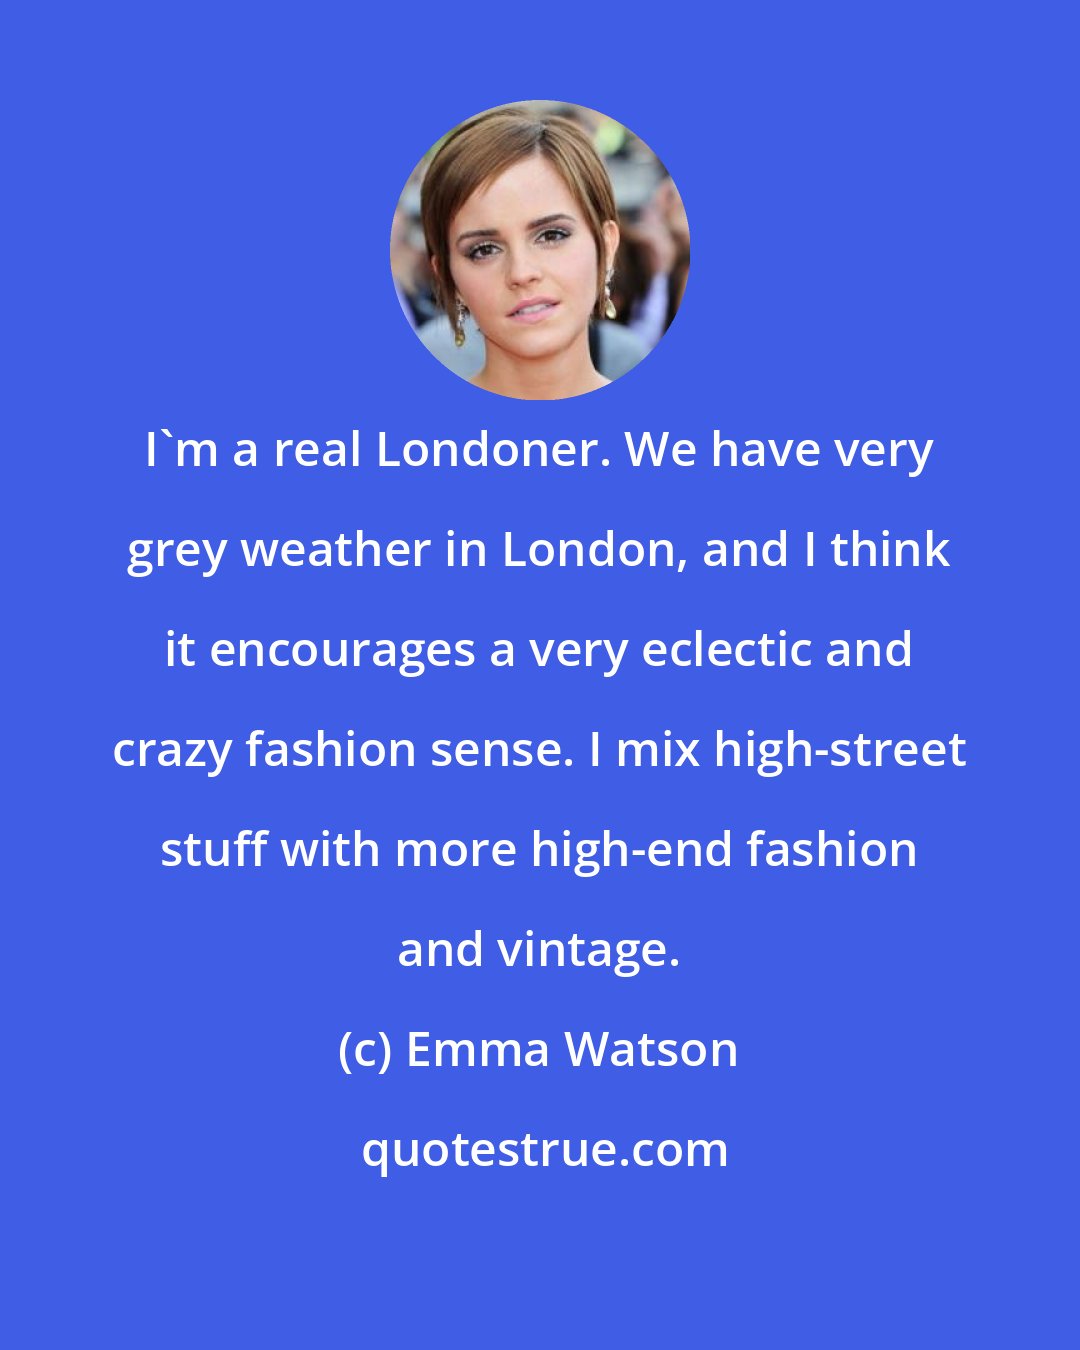 Emma Watson: I'm a real Londoner. We have very grey weather in London, and I think it encourages a very eclectic and crazy fashion sense. I mix high-street stuff with more high-end fashion and vintage.